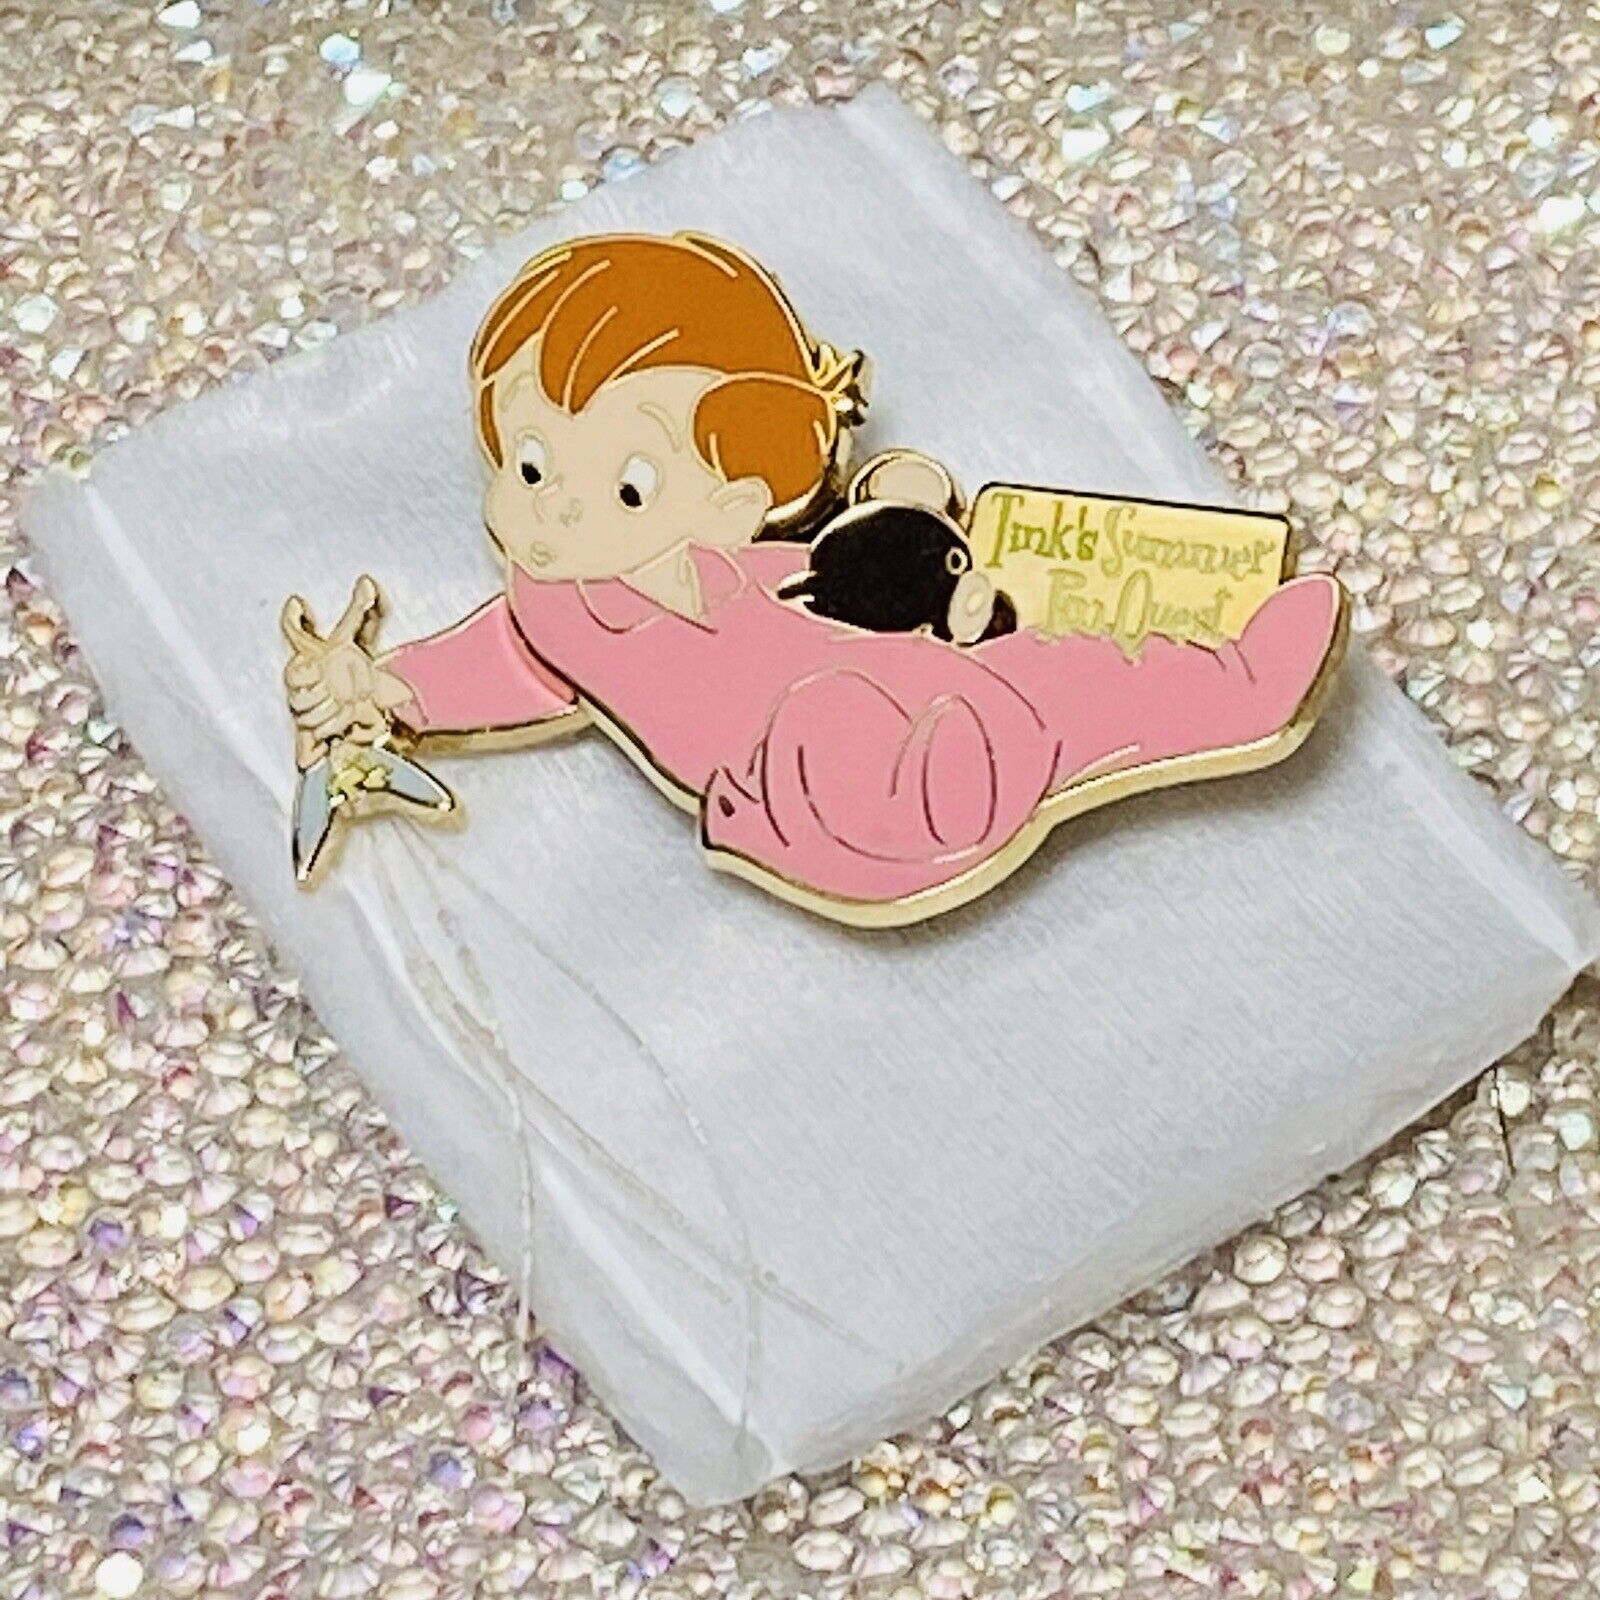 VTG 2004’Tink\'s Summer Pin Quest Michael Shaking Tinker Bell 1 Of LIMITD 750 WDW